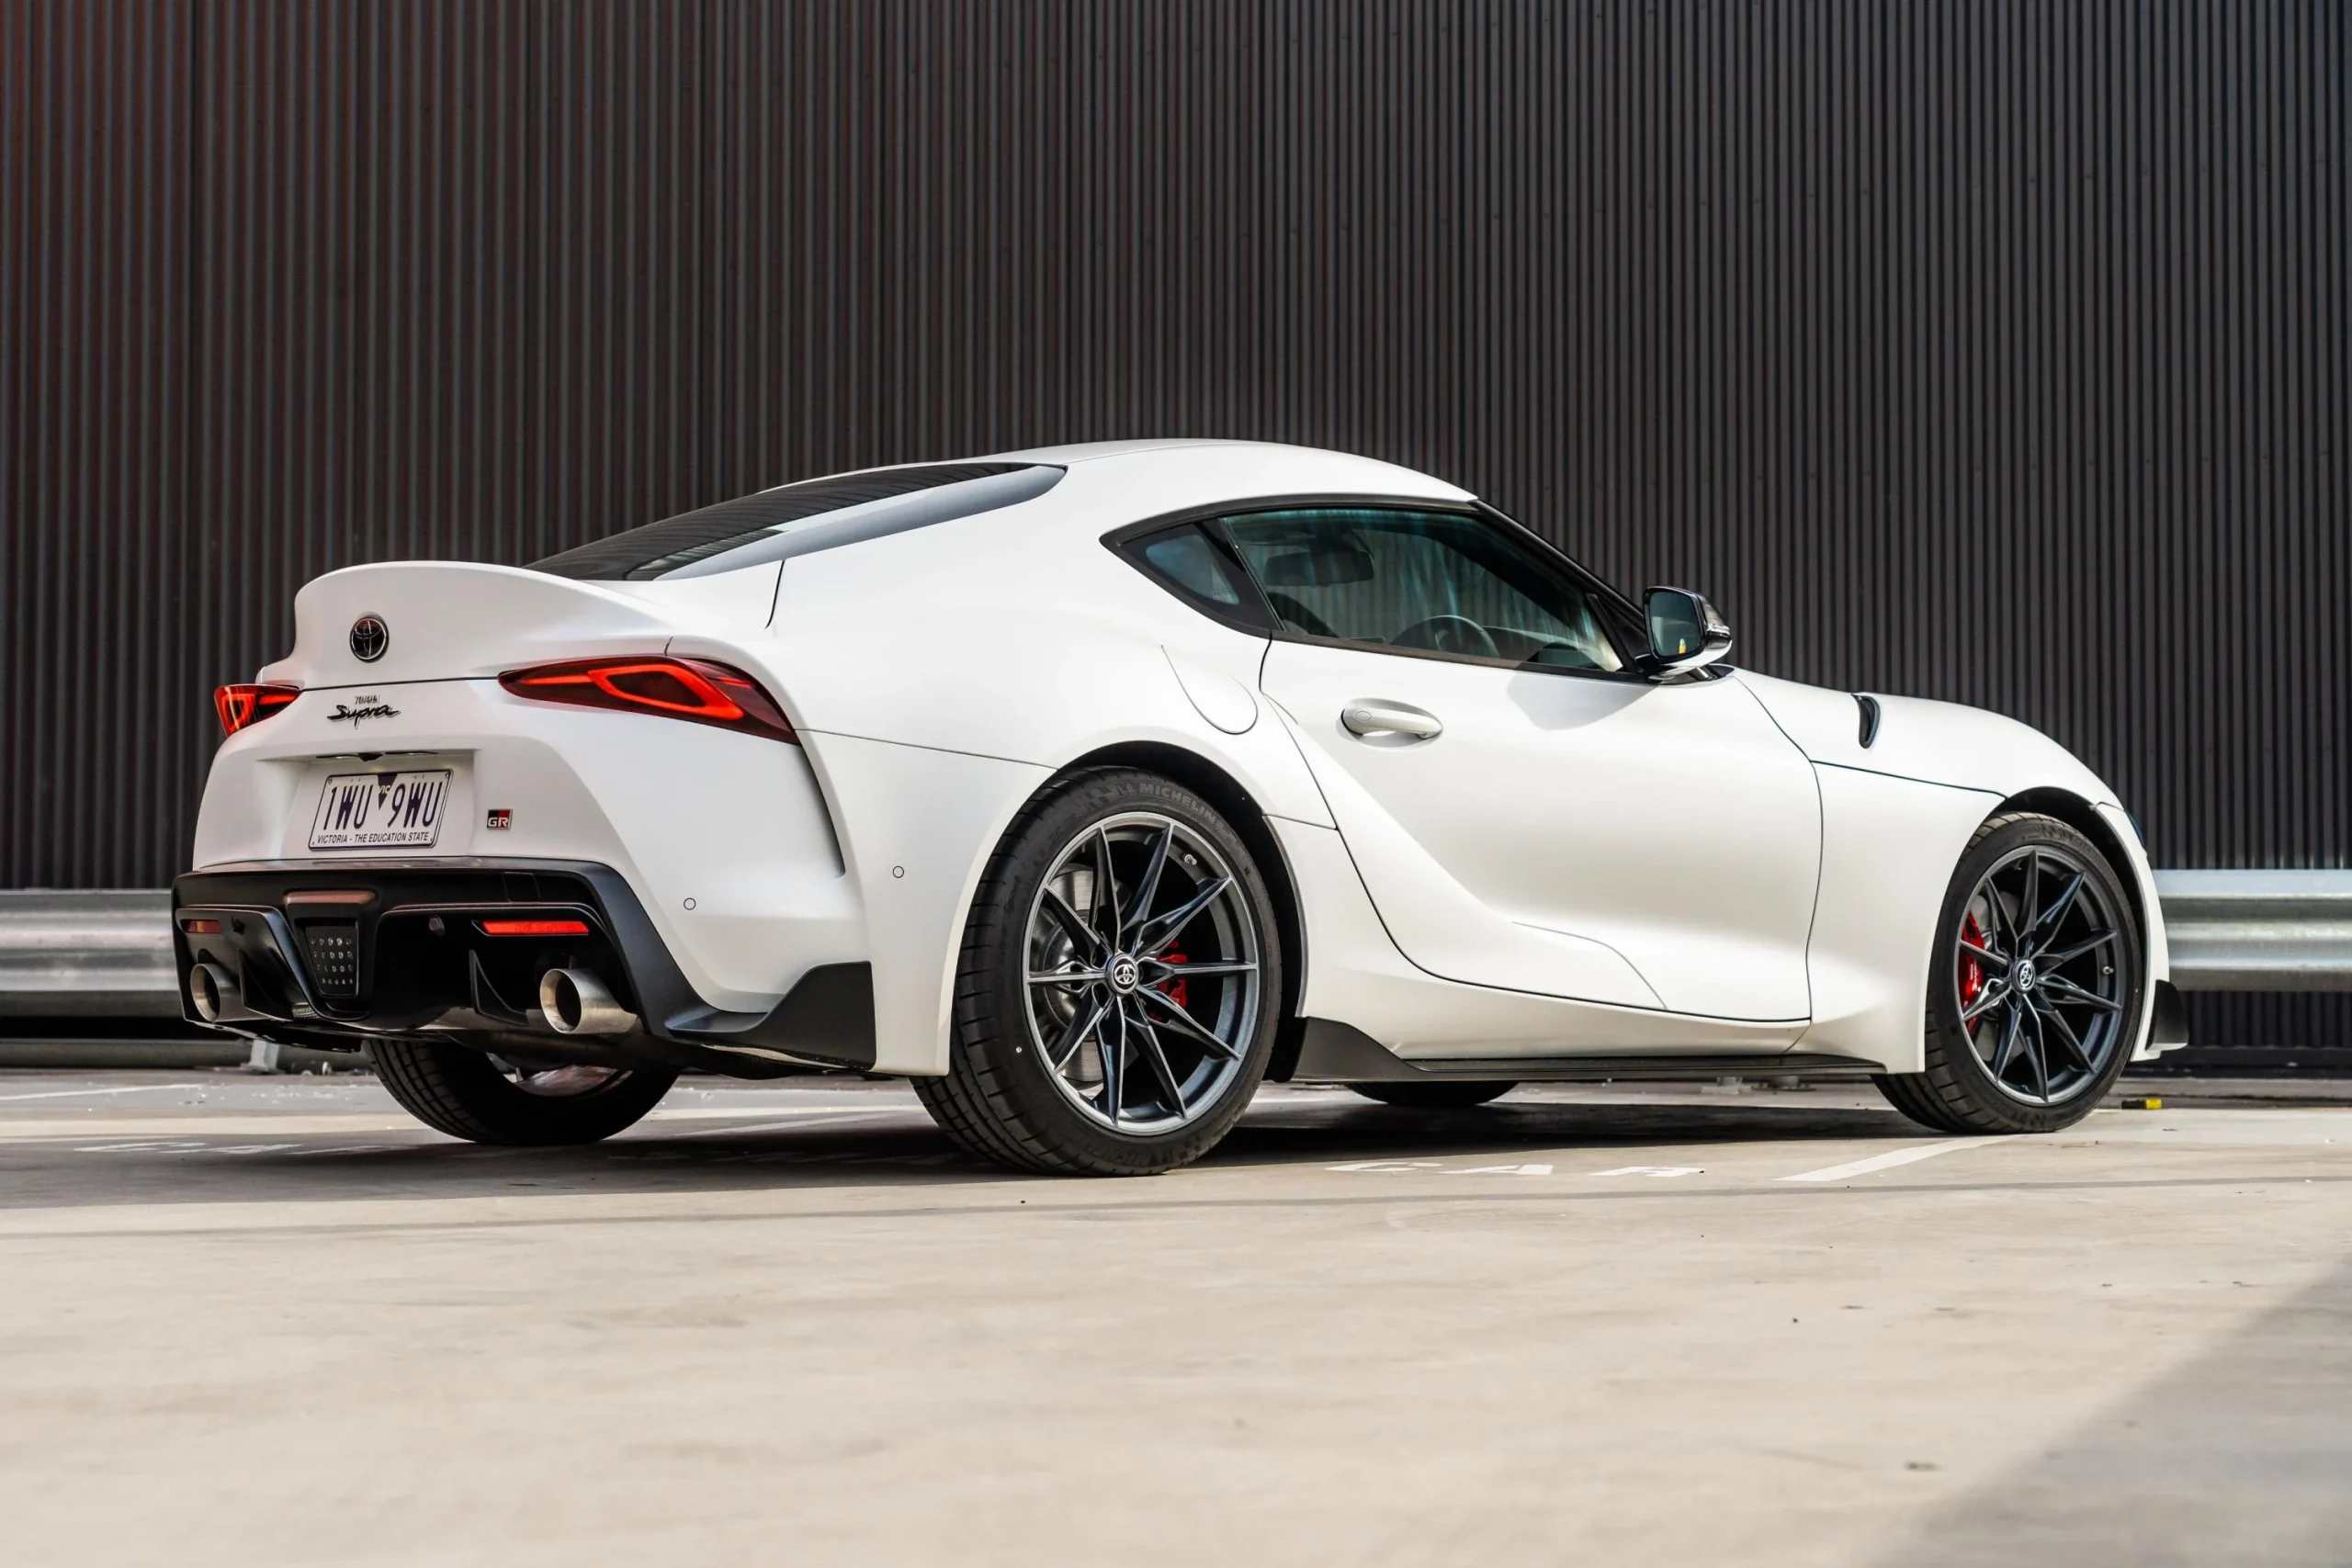 The Fate of Toyota's GR Supra Hangs in the Balance